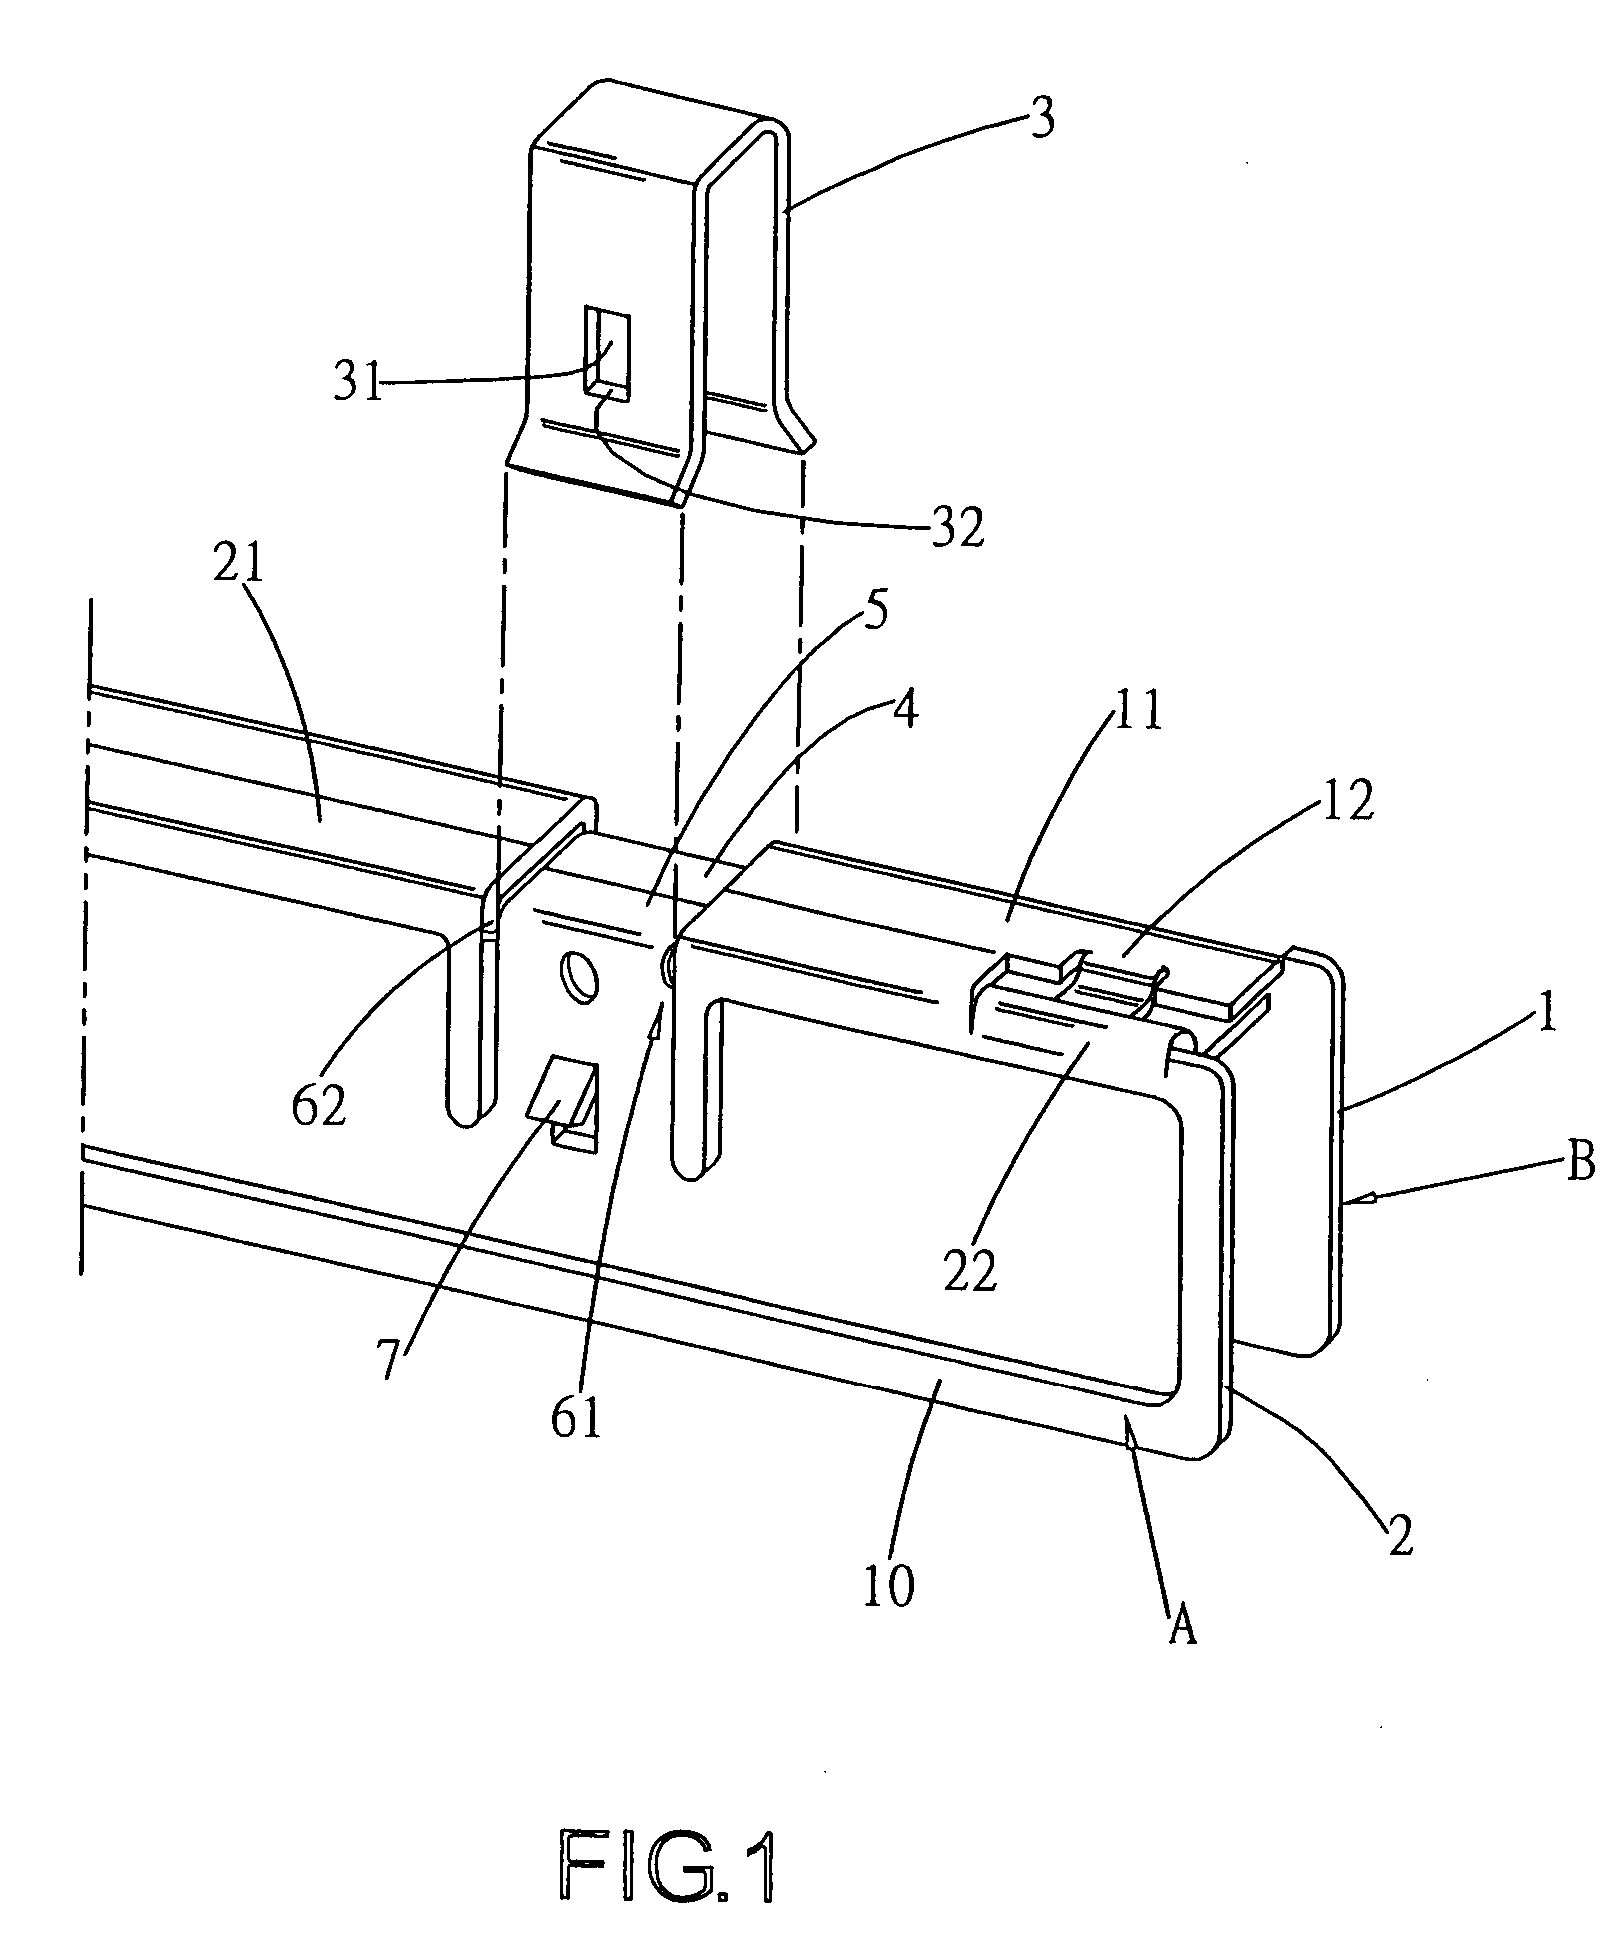 Heat dissipating element for a memory